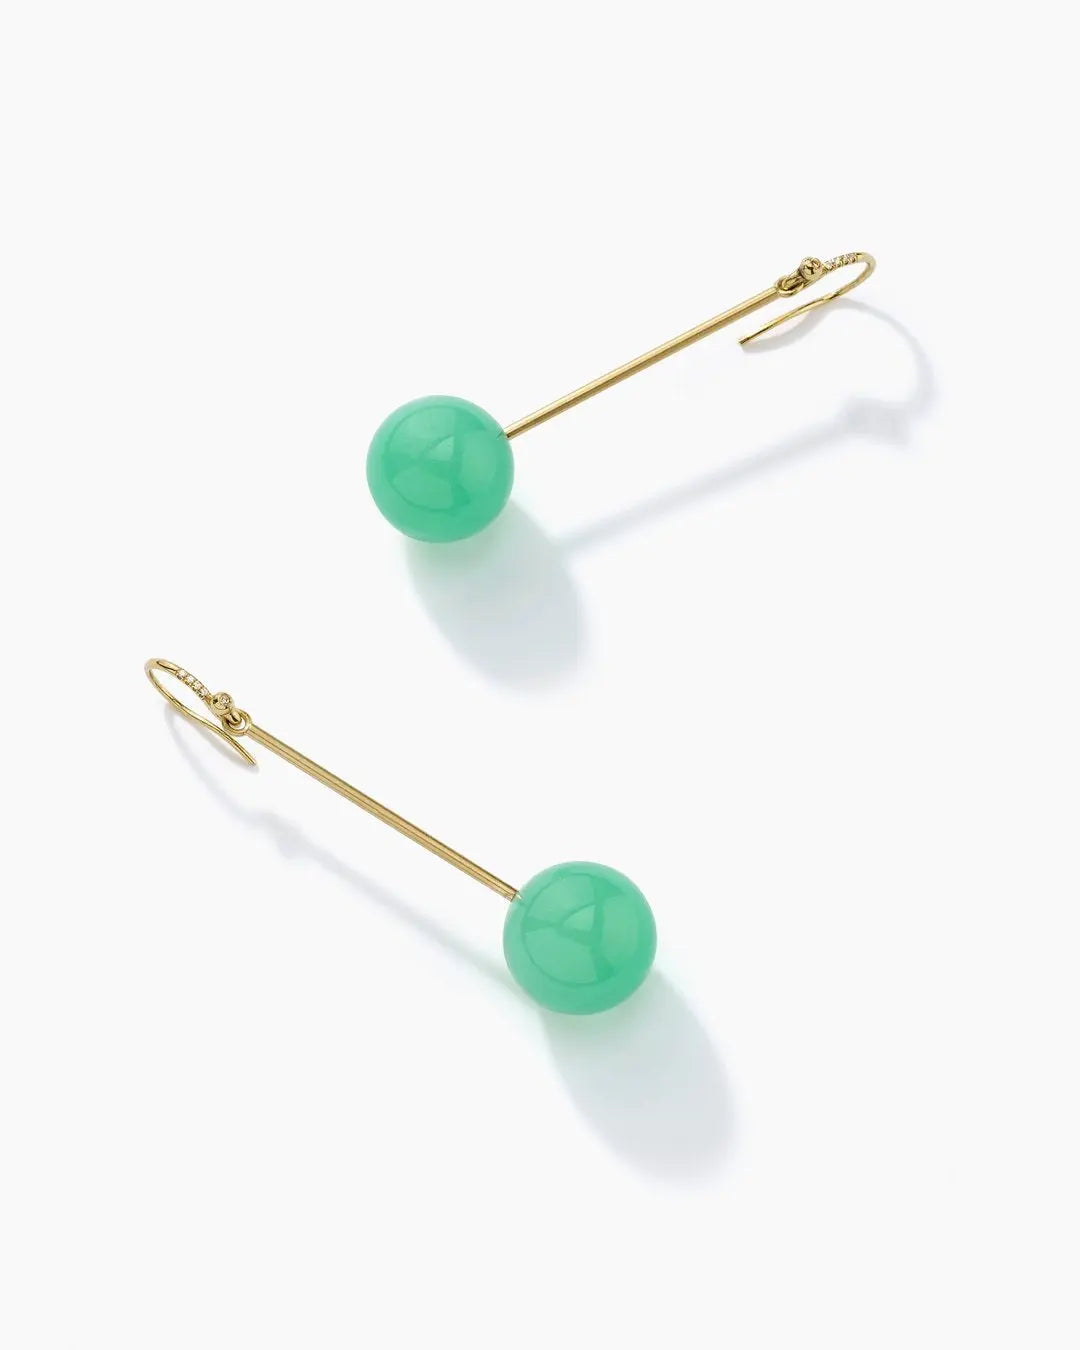 18k yellow gold Earrings set with 16mm Chrysoprase Sphere on Pave Hooks (0.03 cts) Designed by Irene Neuwirth